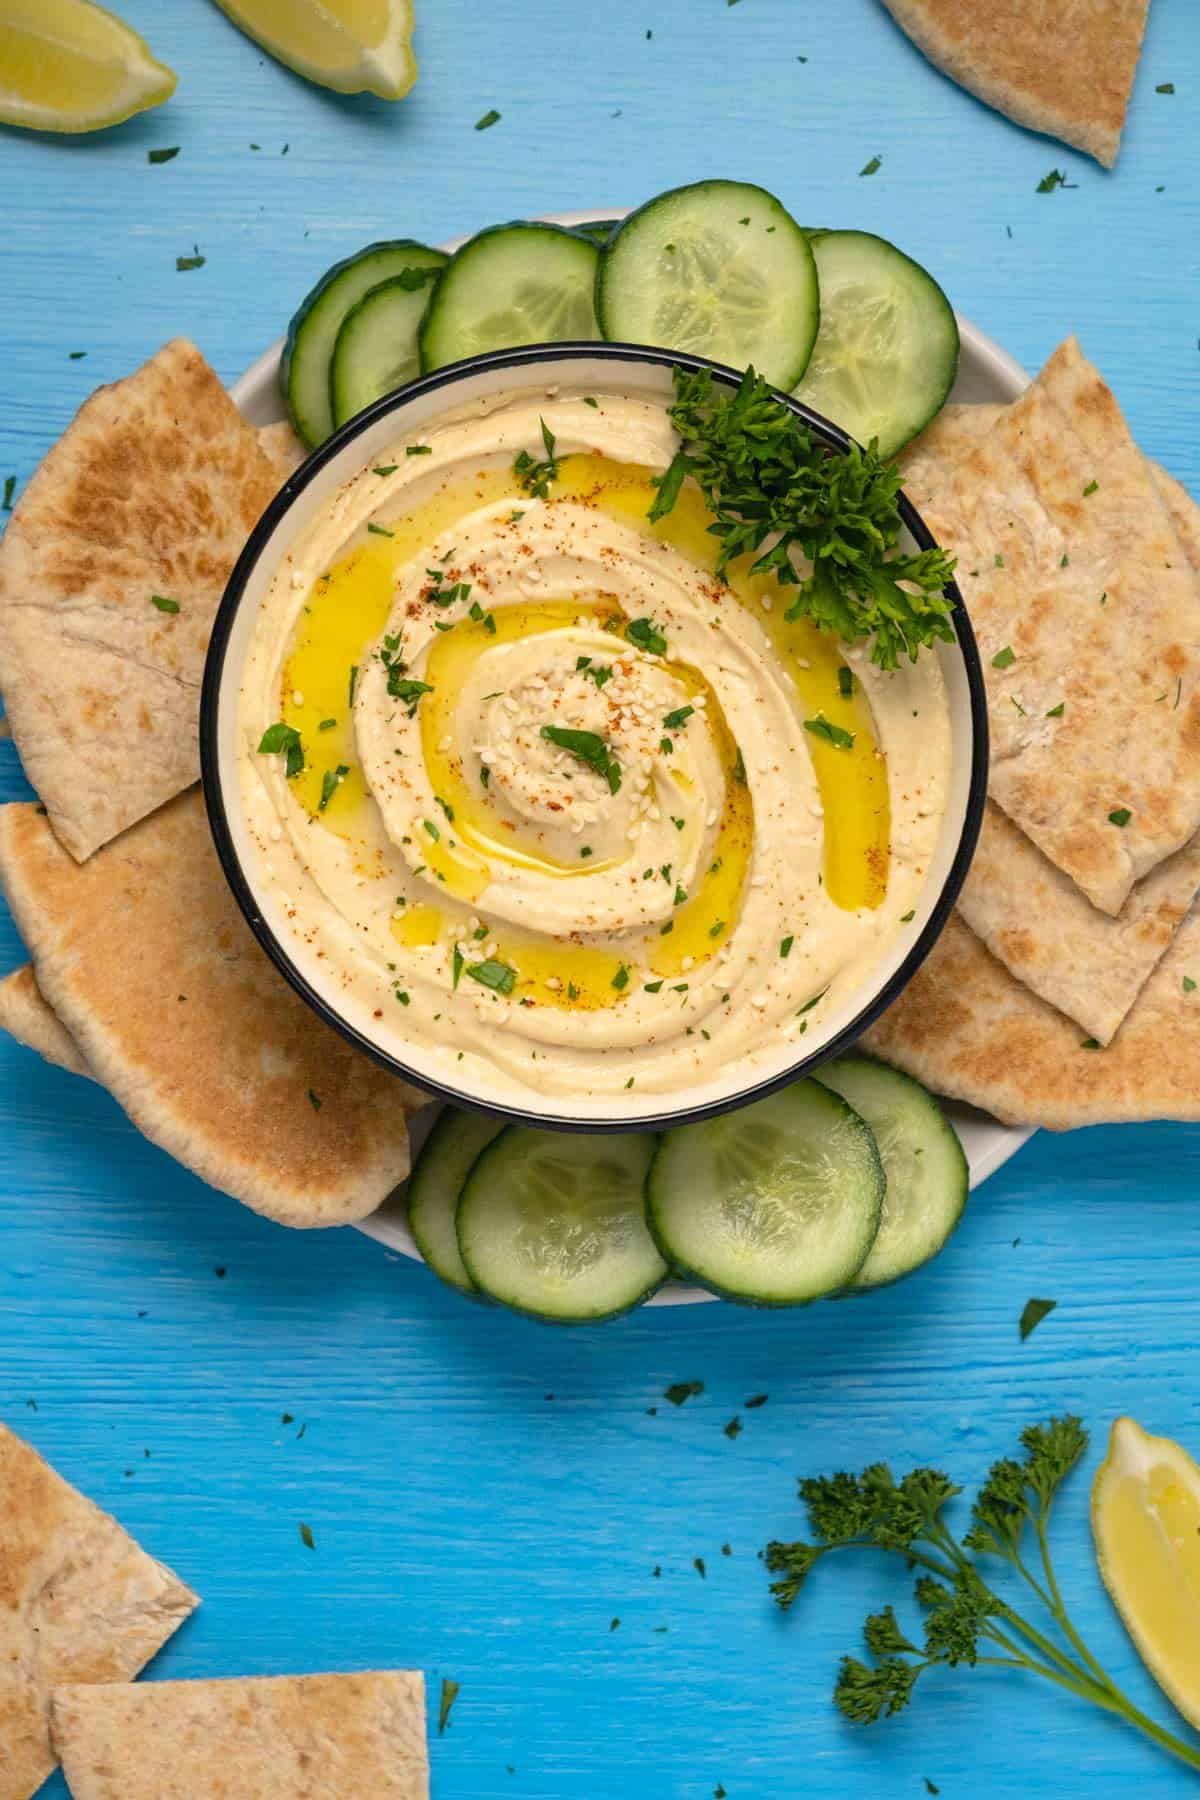 Roasted garlic hummus topped with fresh parsley, olive oil and sesame seeds in a ceramic bowl.